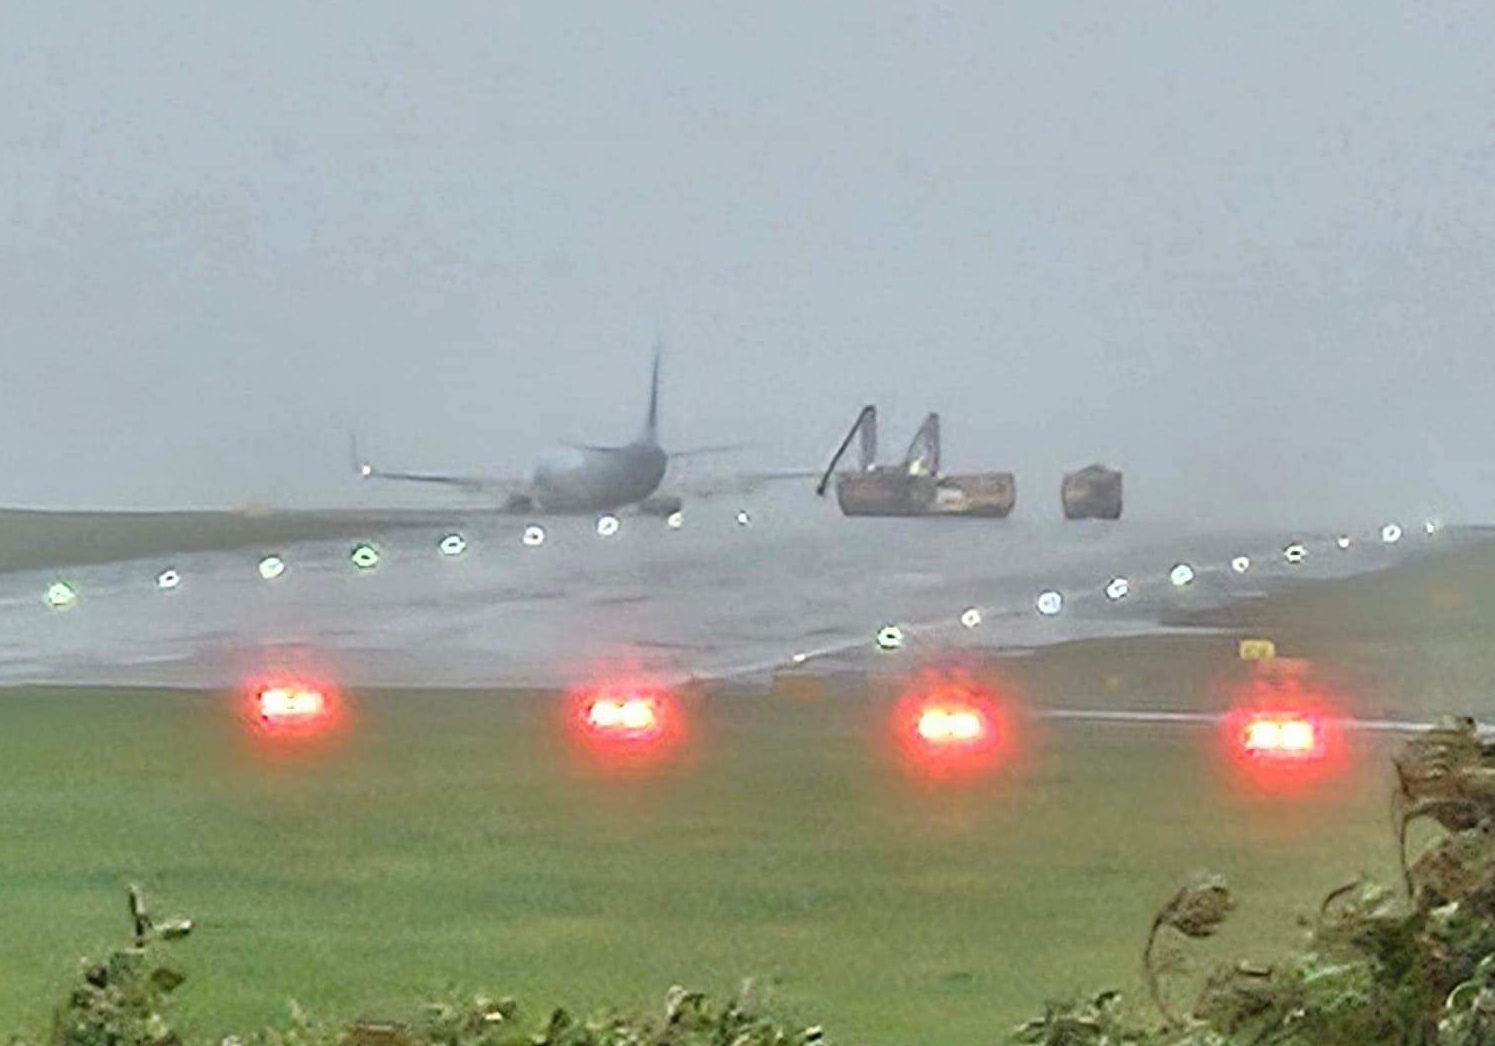 A TUI plane trying to land at Leeds Bradford Airport overruns the runway